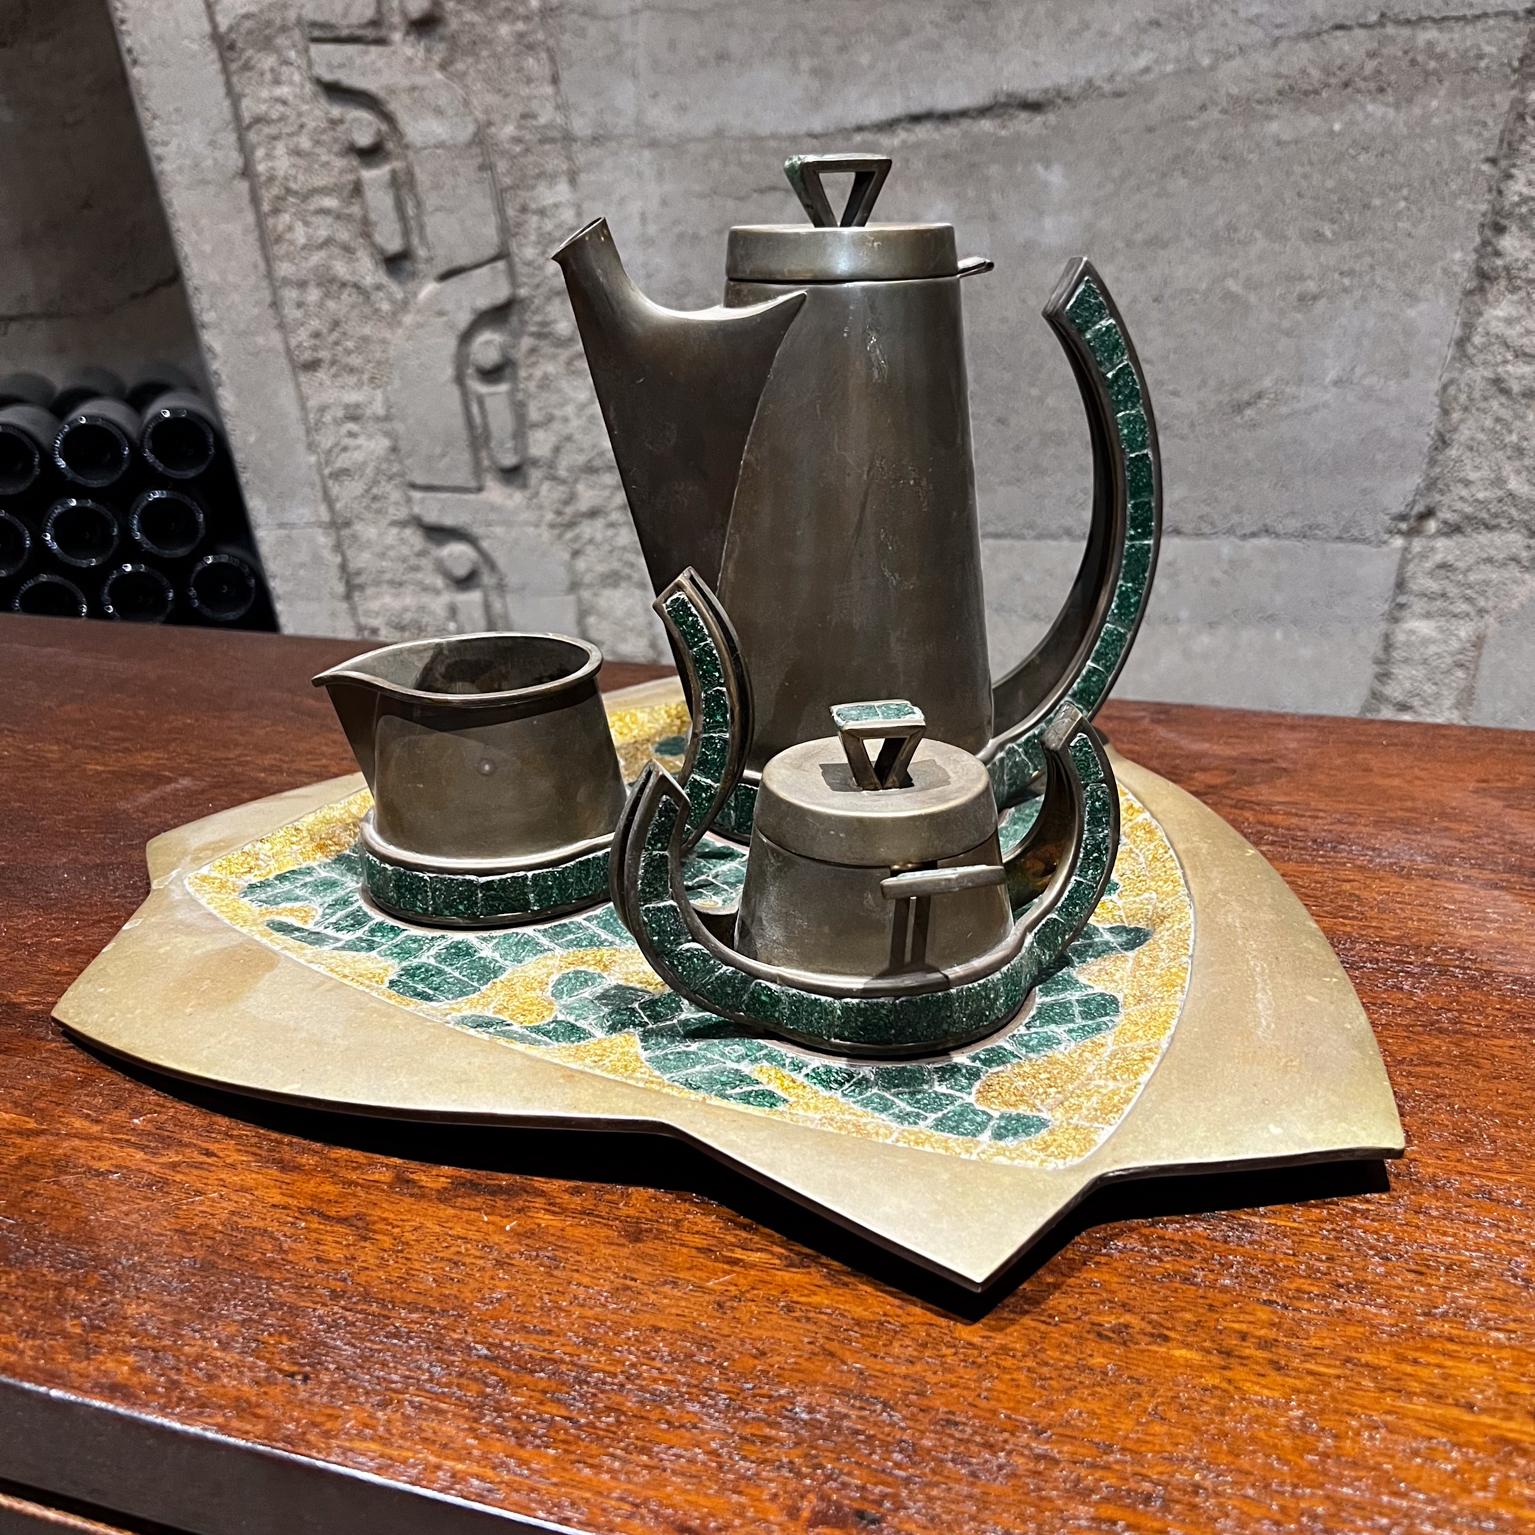 Fabulous handwrought Made in Mexico by Salvador Teran Coffee Tea Service with Spoon & Serving Tray.
Five-piece set
Handcrafted in patinated Brass with exquisite Turquoise Stone Tile Mosaic.
Set includes
1.Coffee Pot: 8.75 x 7.5d x